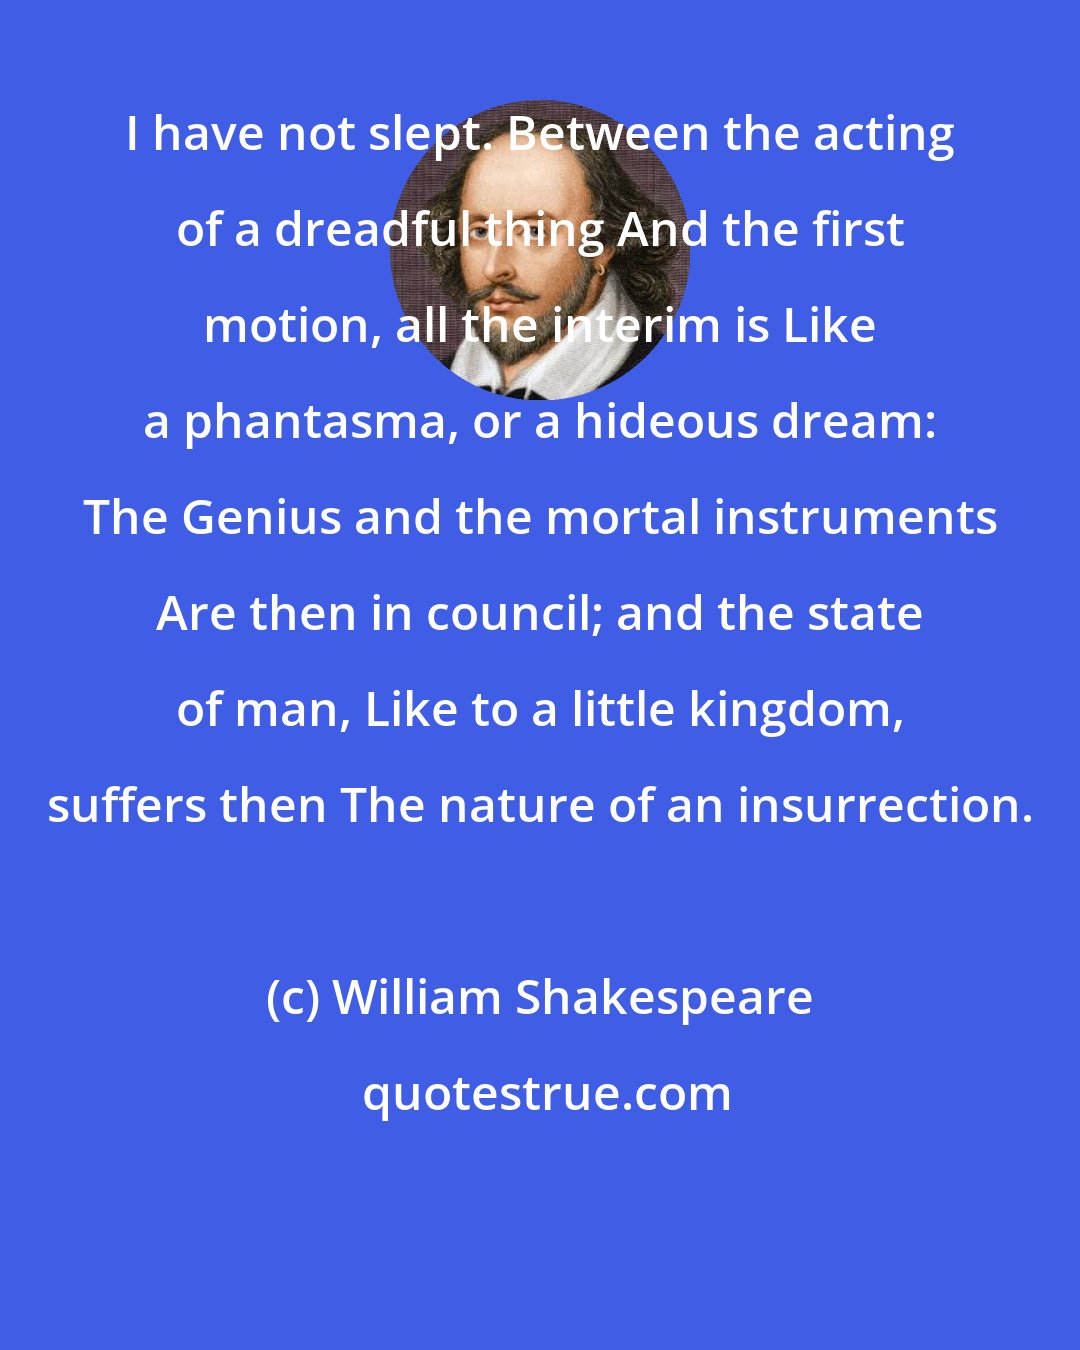 William Shakespeare: I have not slept. Between the acting of a dreadful thing And the first motion, all the interim is Like a phantasma, or a hideous dream: The Genius and the mortal instruments Are then in council; and the state of man, Like to a little kingdom, suffers then The nature of an insurrection.